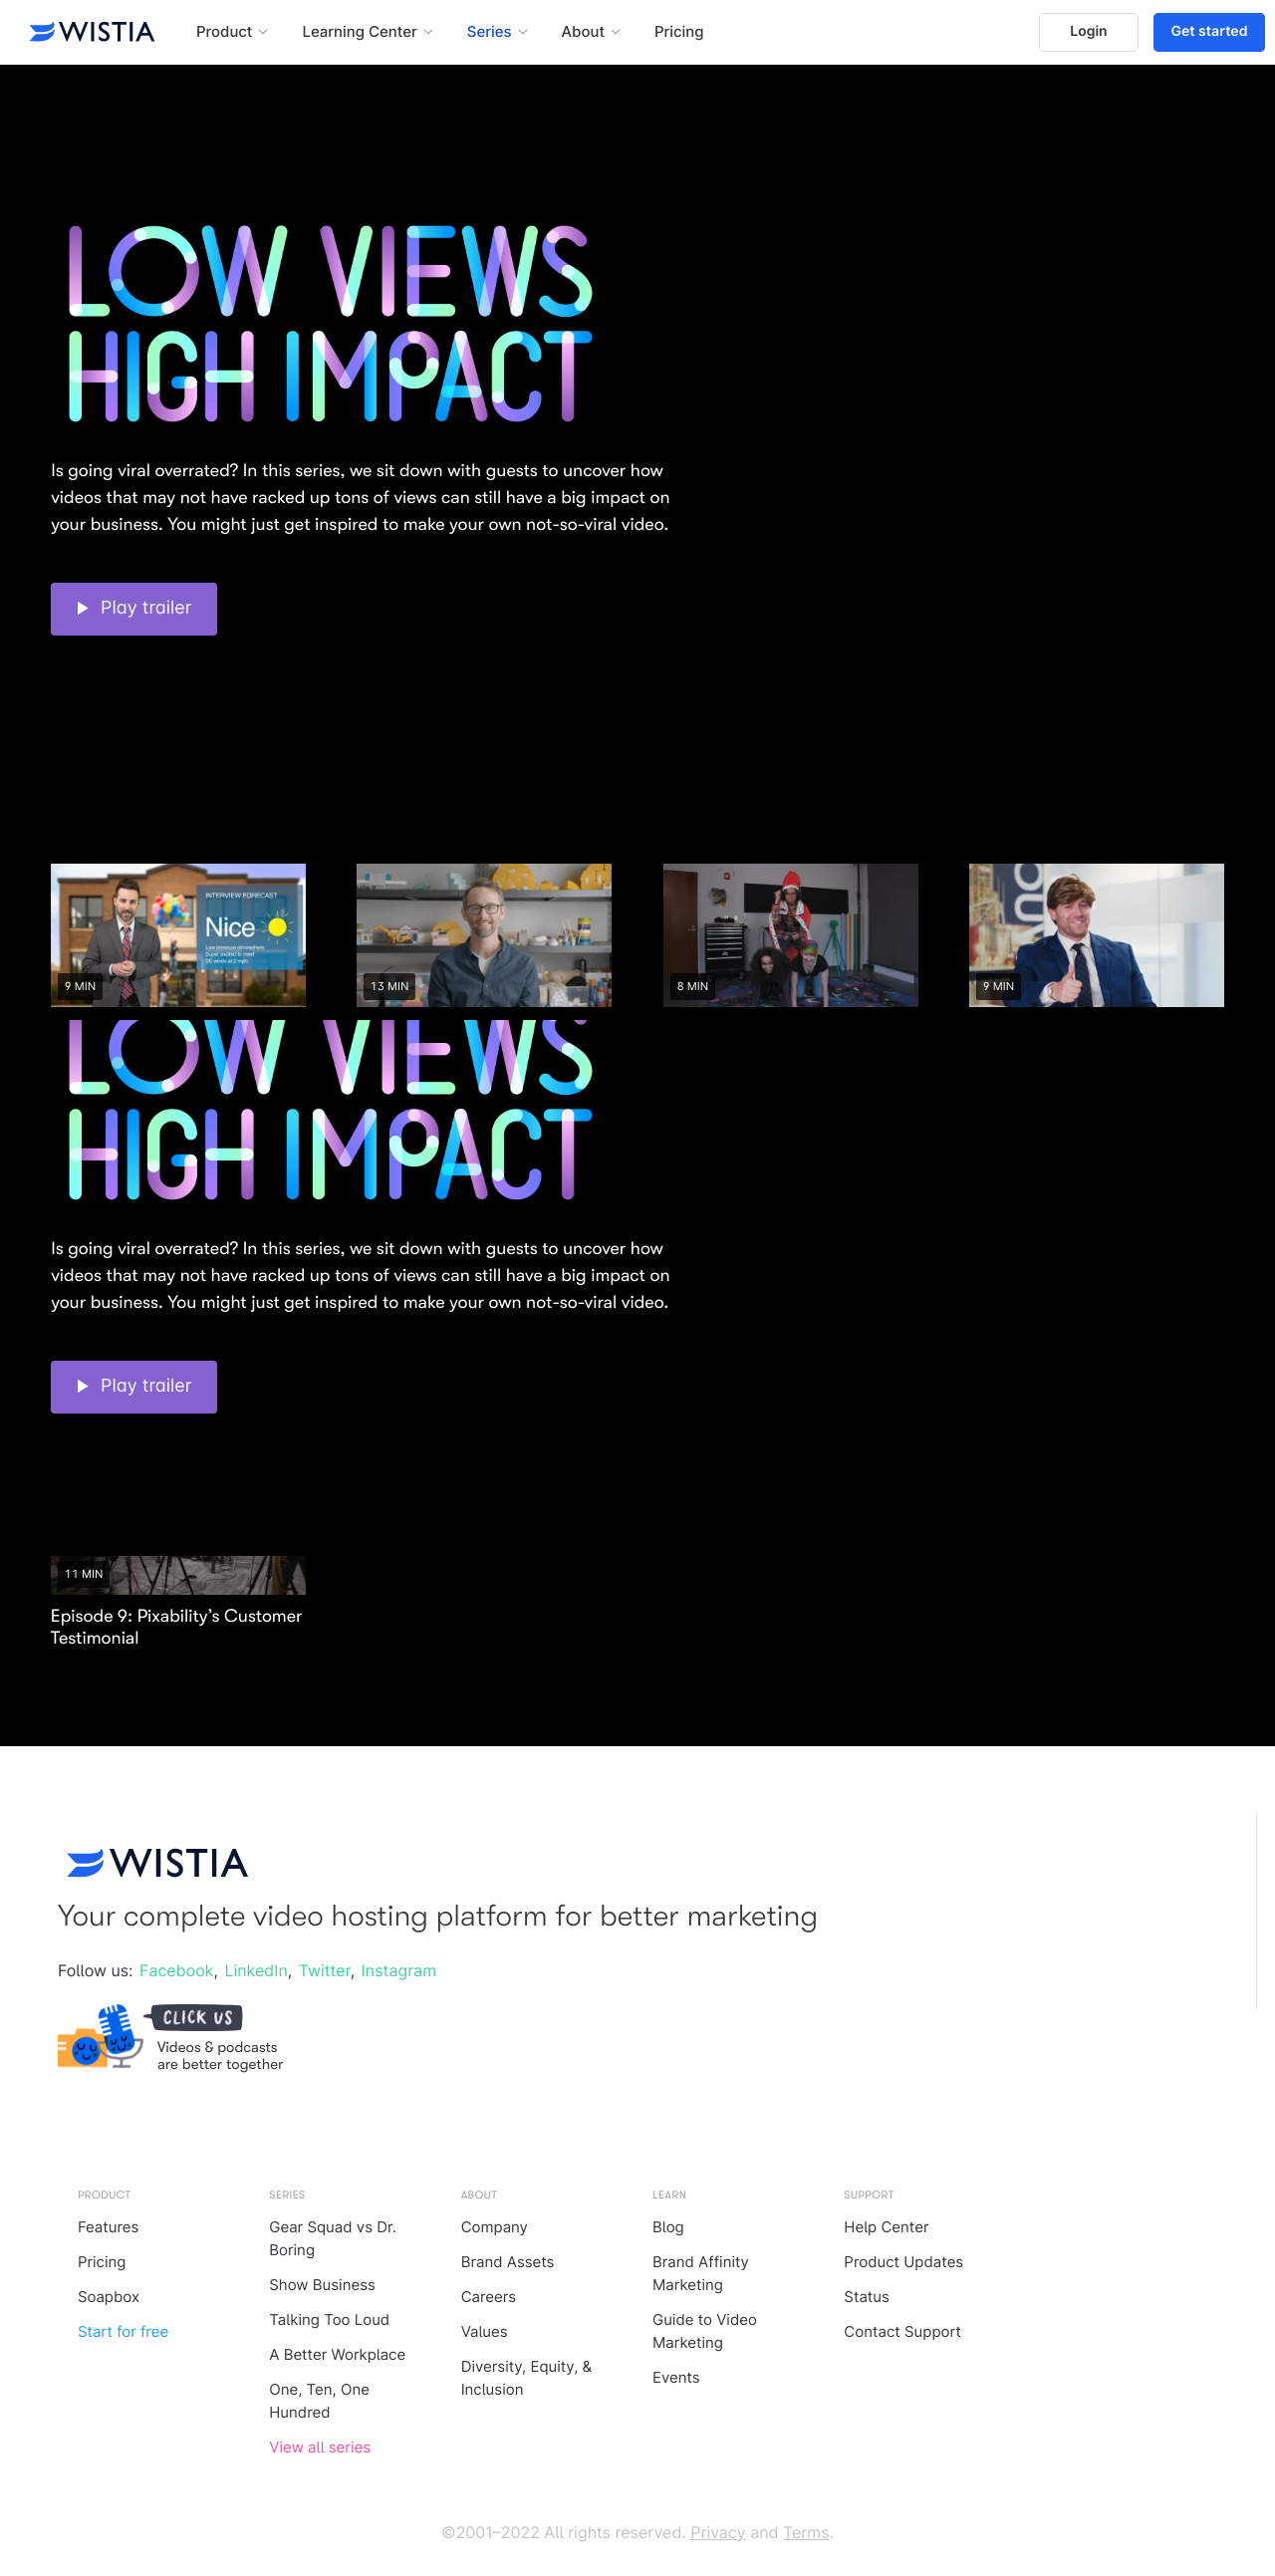 content marketing example of Low Views High Impact - A Wistia Original Series